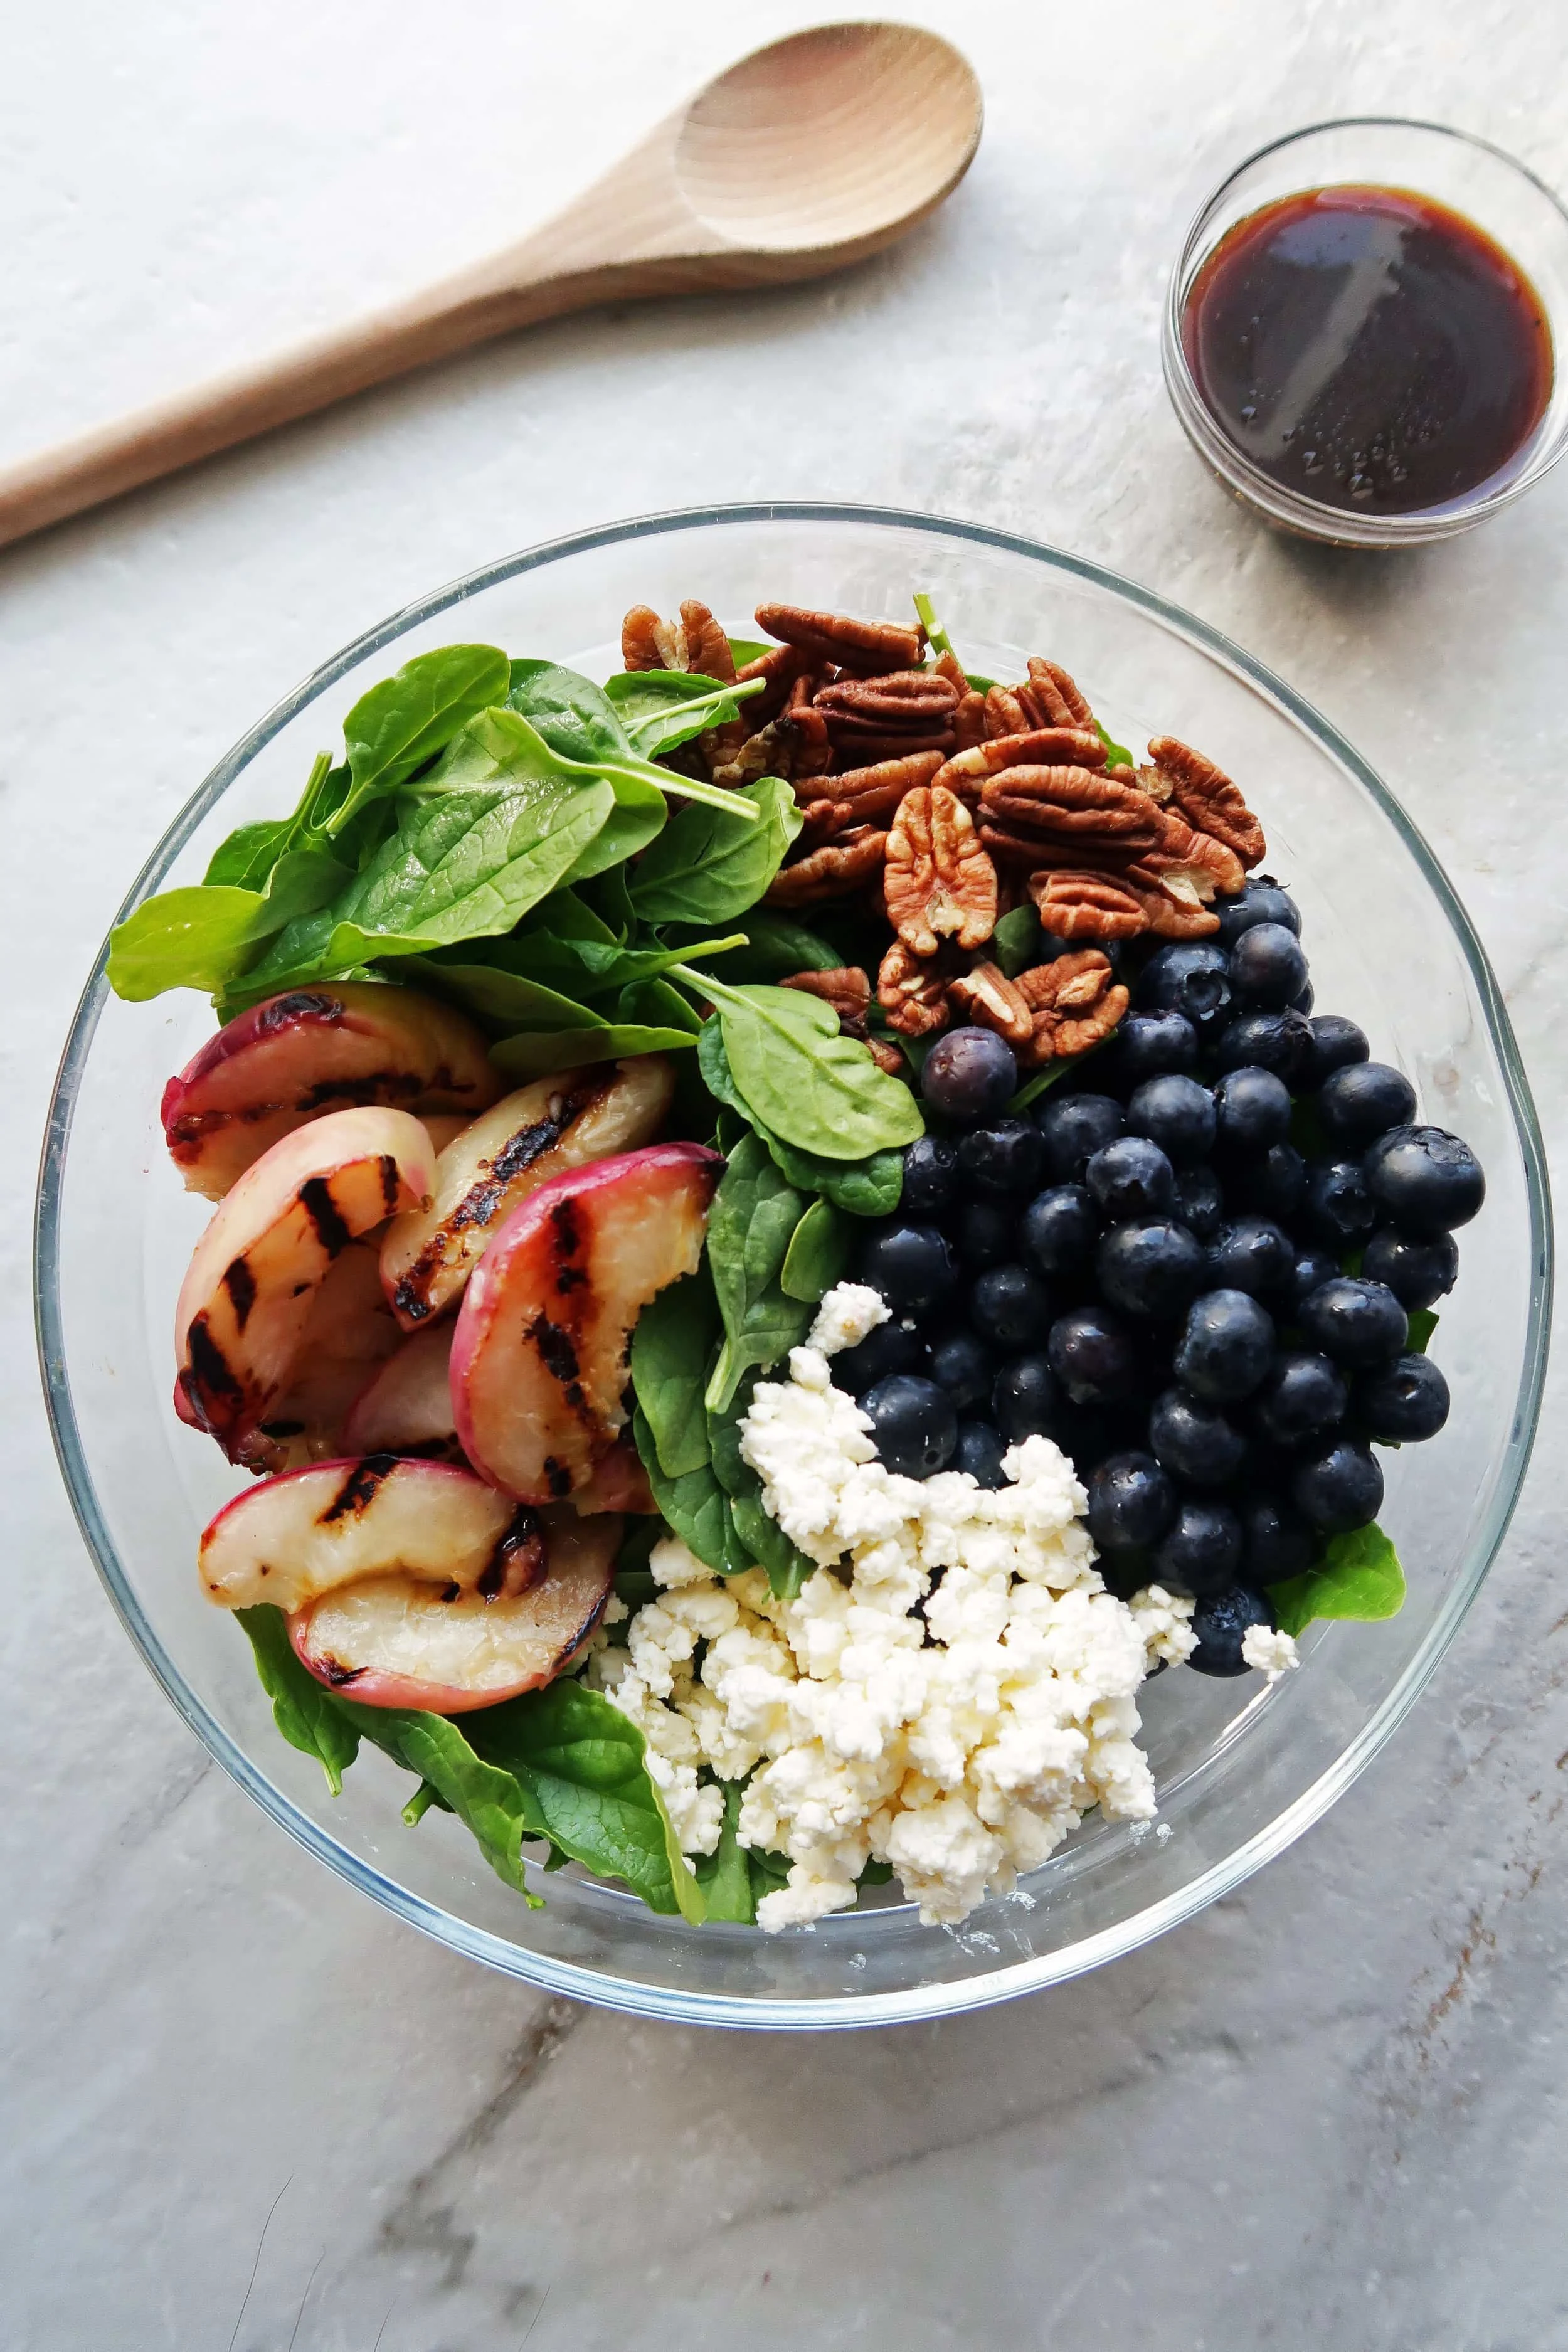 A big glass bowl of spinach covered with grilled peach slices, pecans, blueberries, and crumbled feta cheese with honey balsamic vinaigrette on the side.